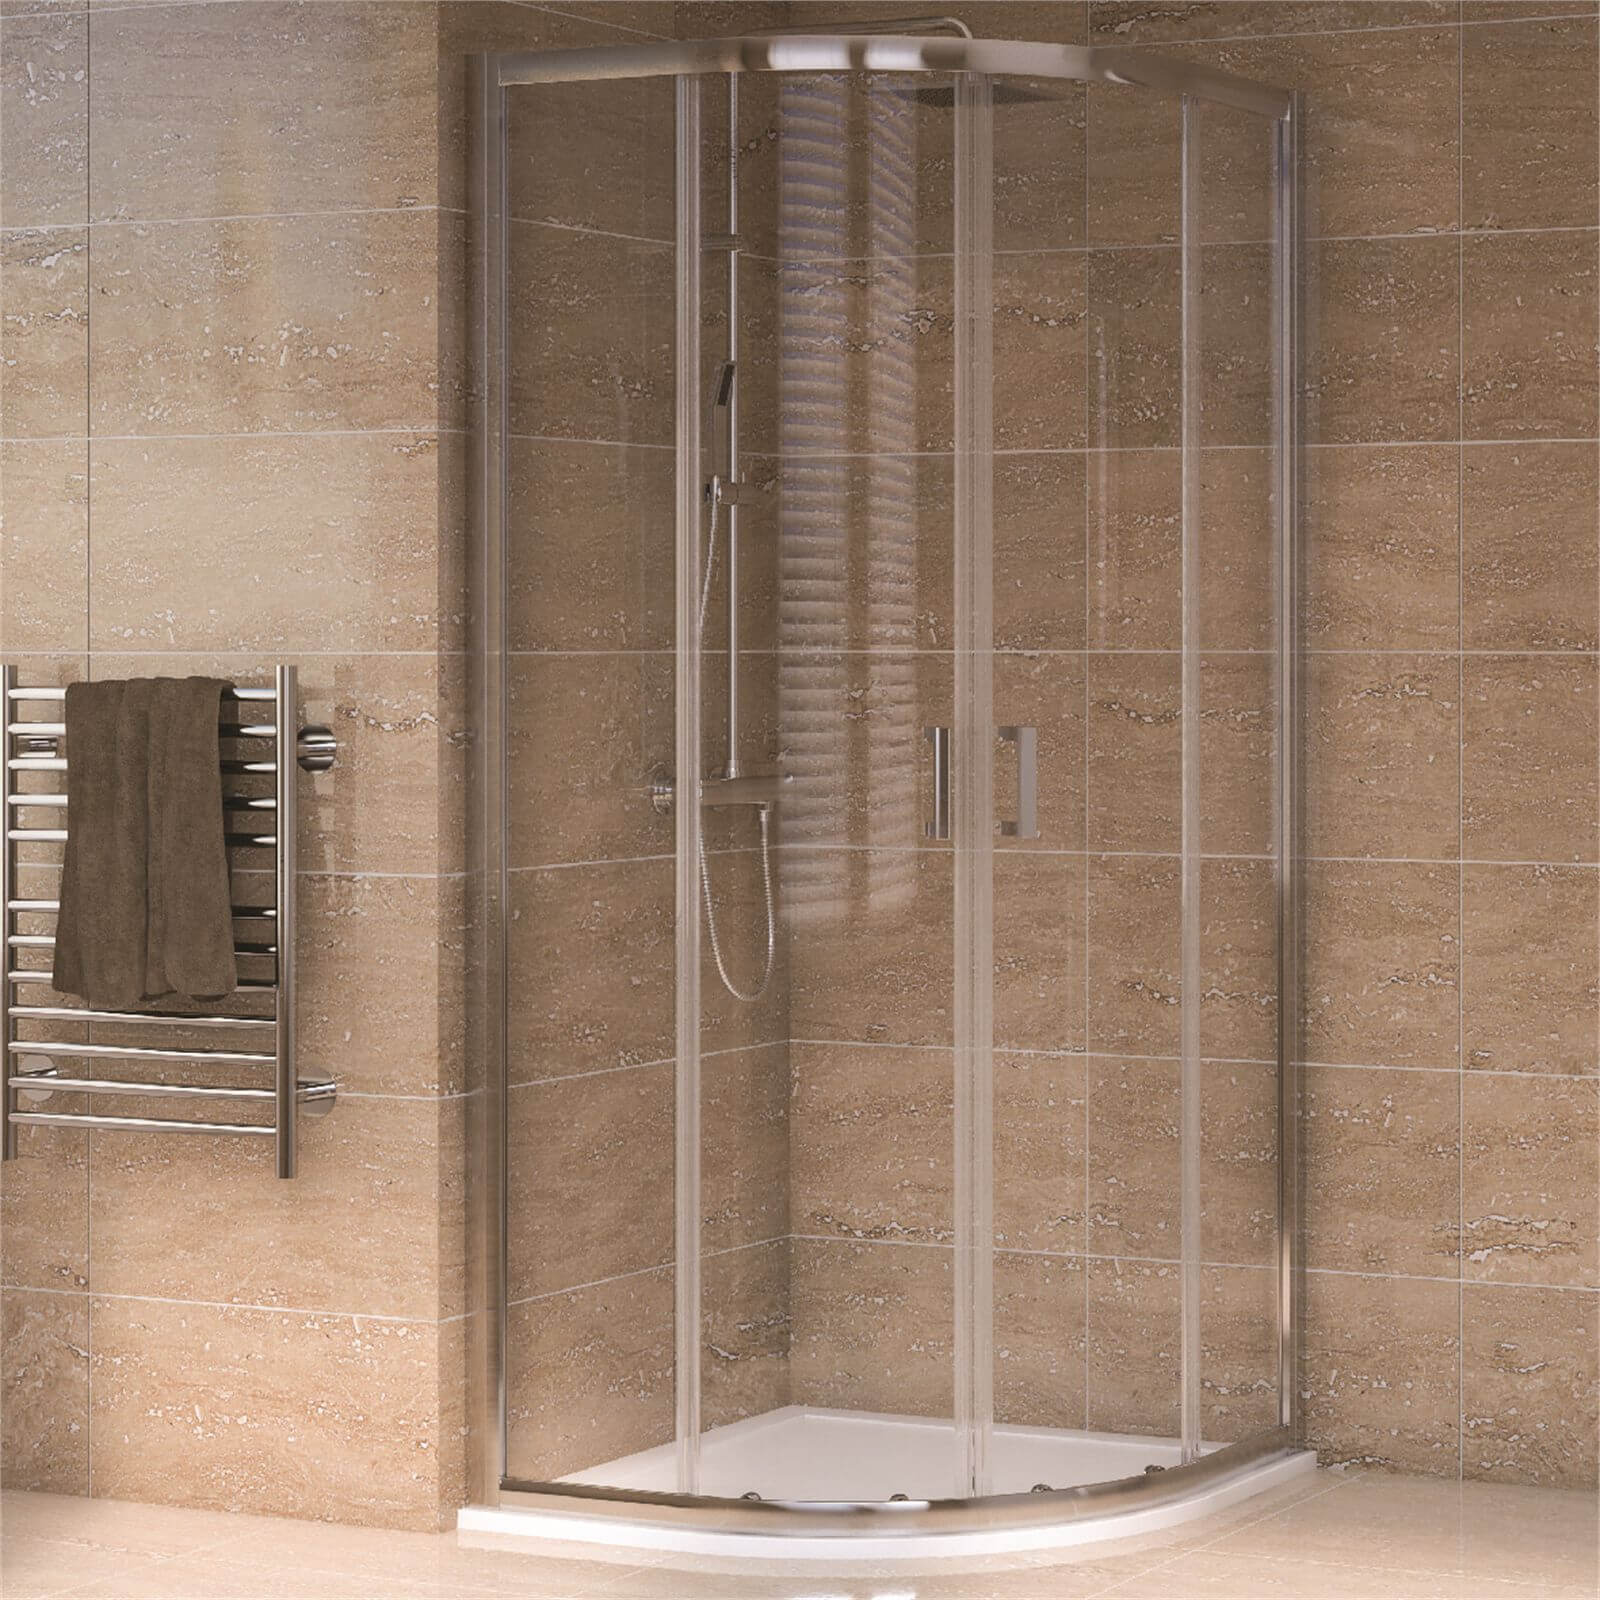 Photo of Aqualux Quadrant 800 X 800mm Shower Enclosure And Tray Package